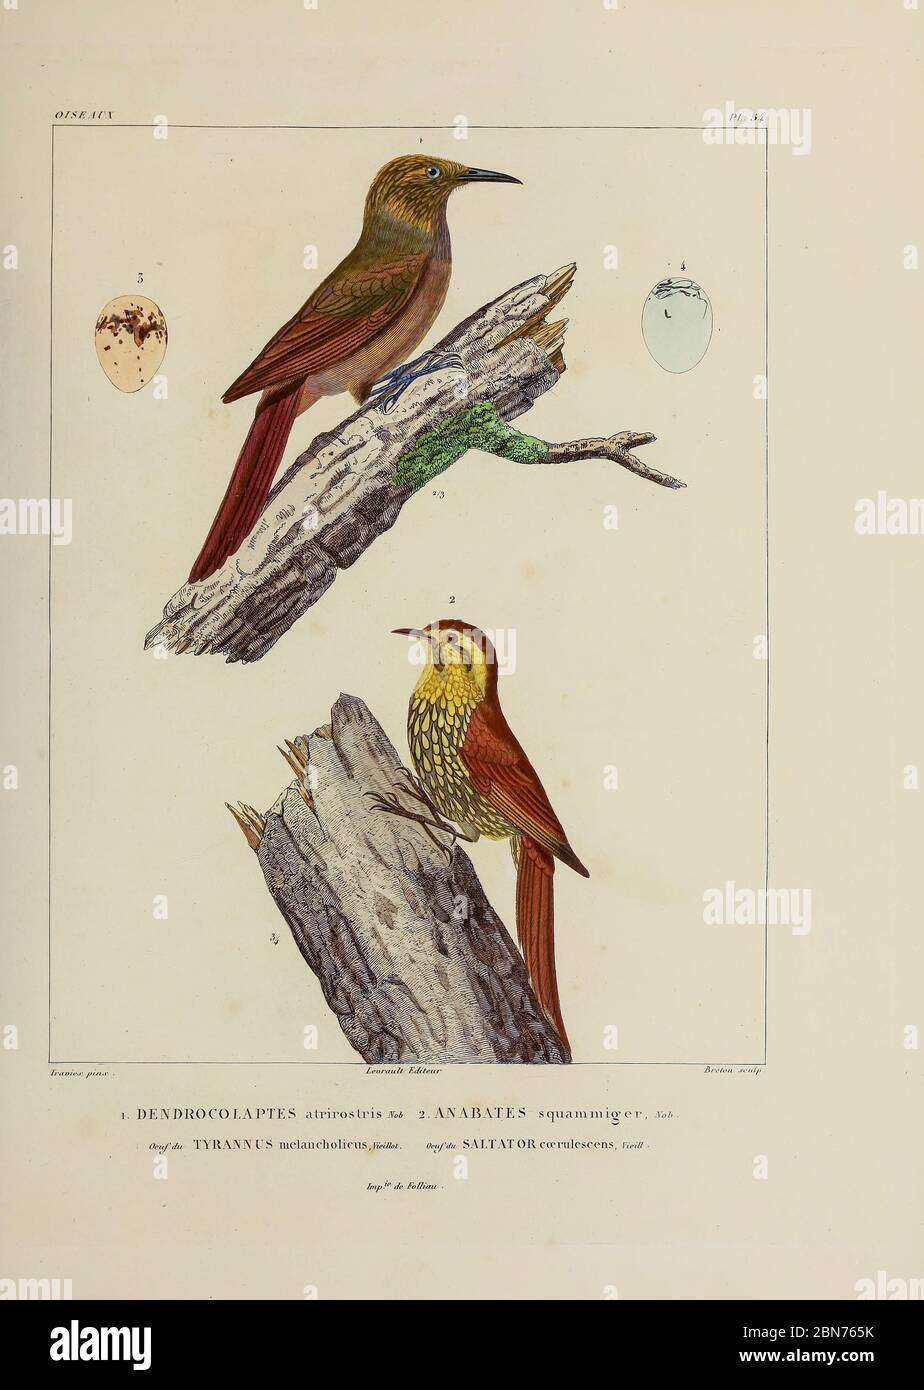 hand coloured sketch Top: plain-brown woodcreeper (Dendrocincla fuliginosa [Here as dendrocolaptes atrirostris]) Bottom: pearled treerunner (Margarornis squamiger [Here as Anabates squammiger]) From the book 'Voyage dans l'Amérique Méridionale' [Journey to South America: (Brazil, the eastern republic of Uruguay, the Argentine Republic, Patagonia, the republic of Chile, the republic of Bolivia, the republic of Peru), executed during the years 1826 - 1833] 4th volume Part 3 By: Orbigny, Alcide Dessalines d', d'Orbigny, 1802-1857; Montagne, Jean François Camille, 1784-1866; Martius, Karl Friedri Stock Photo